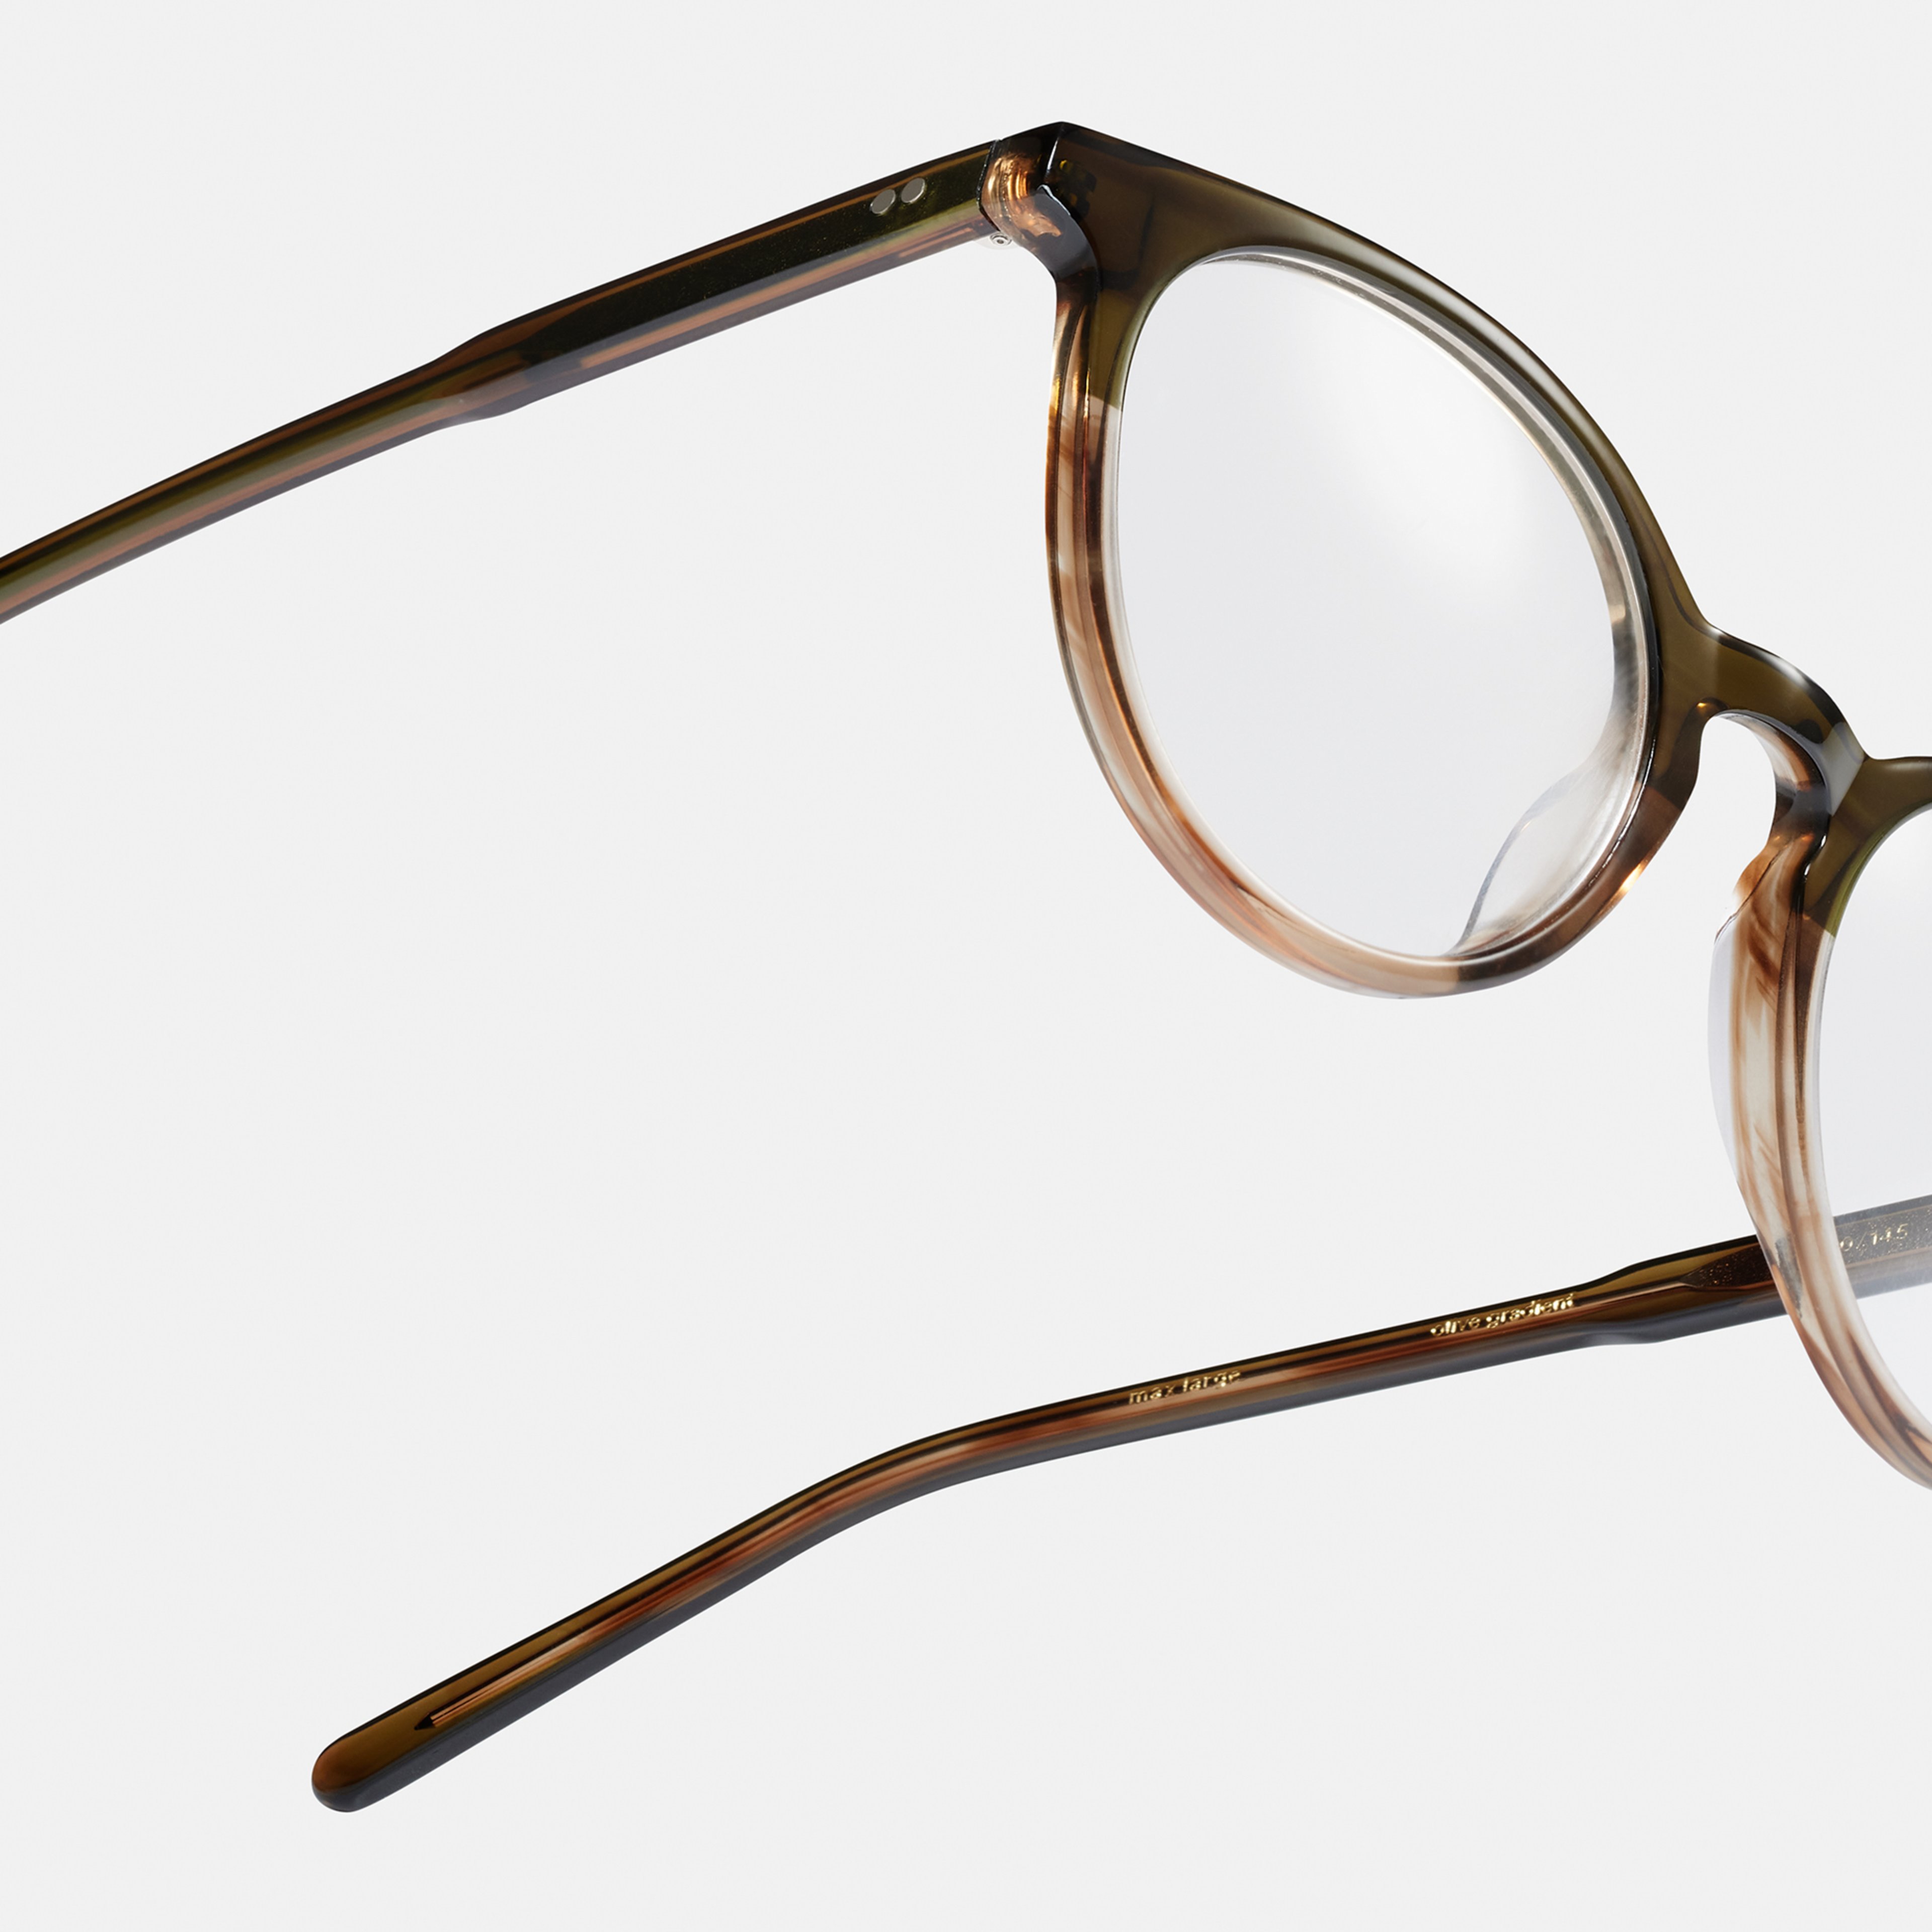 Ace & Tate Glasses | Round Acetate in Brown, Green